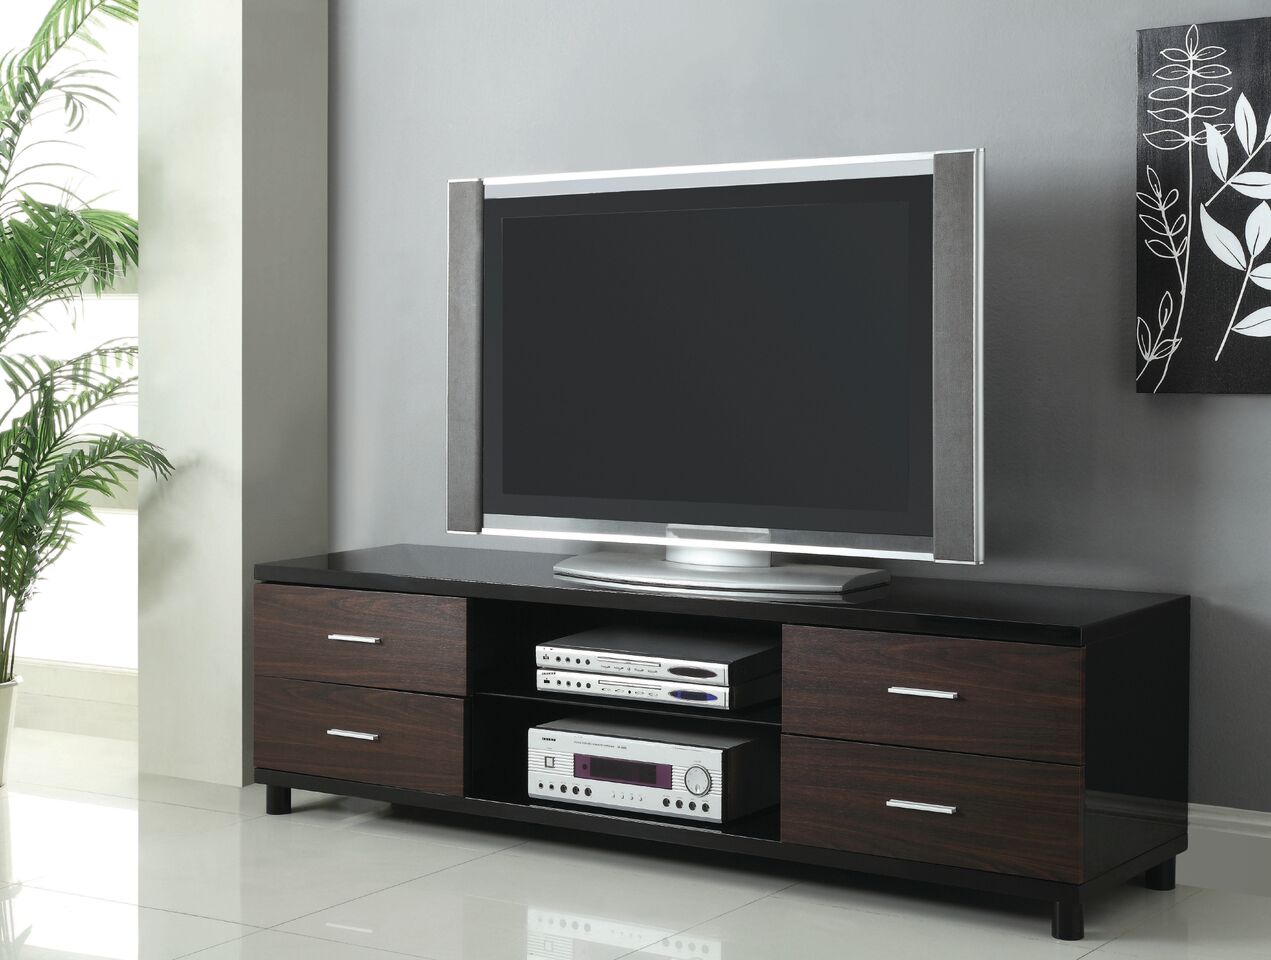 TV6124 - TV Stand